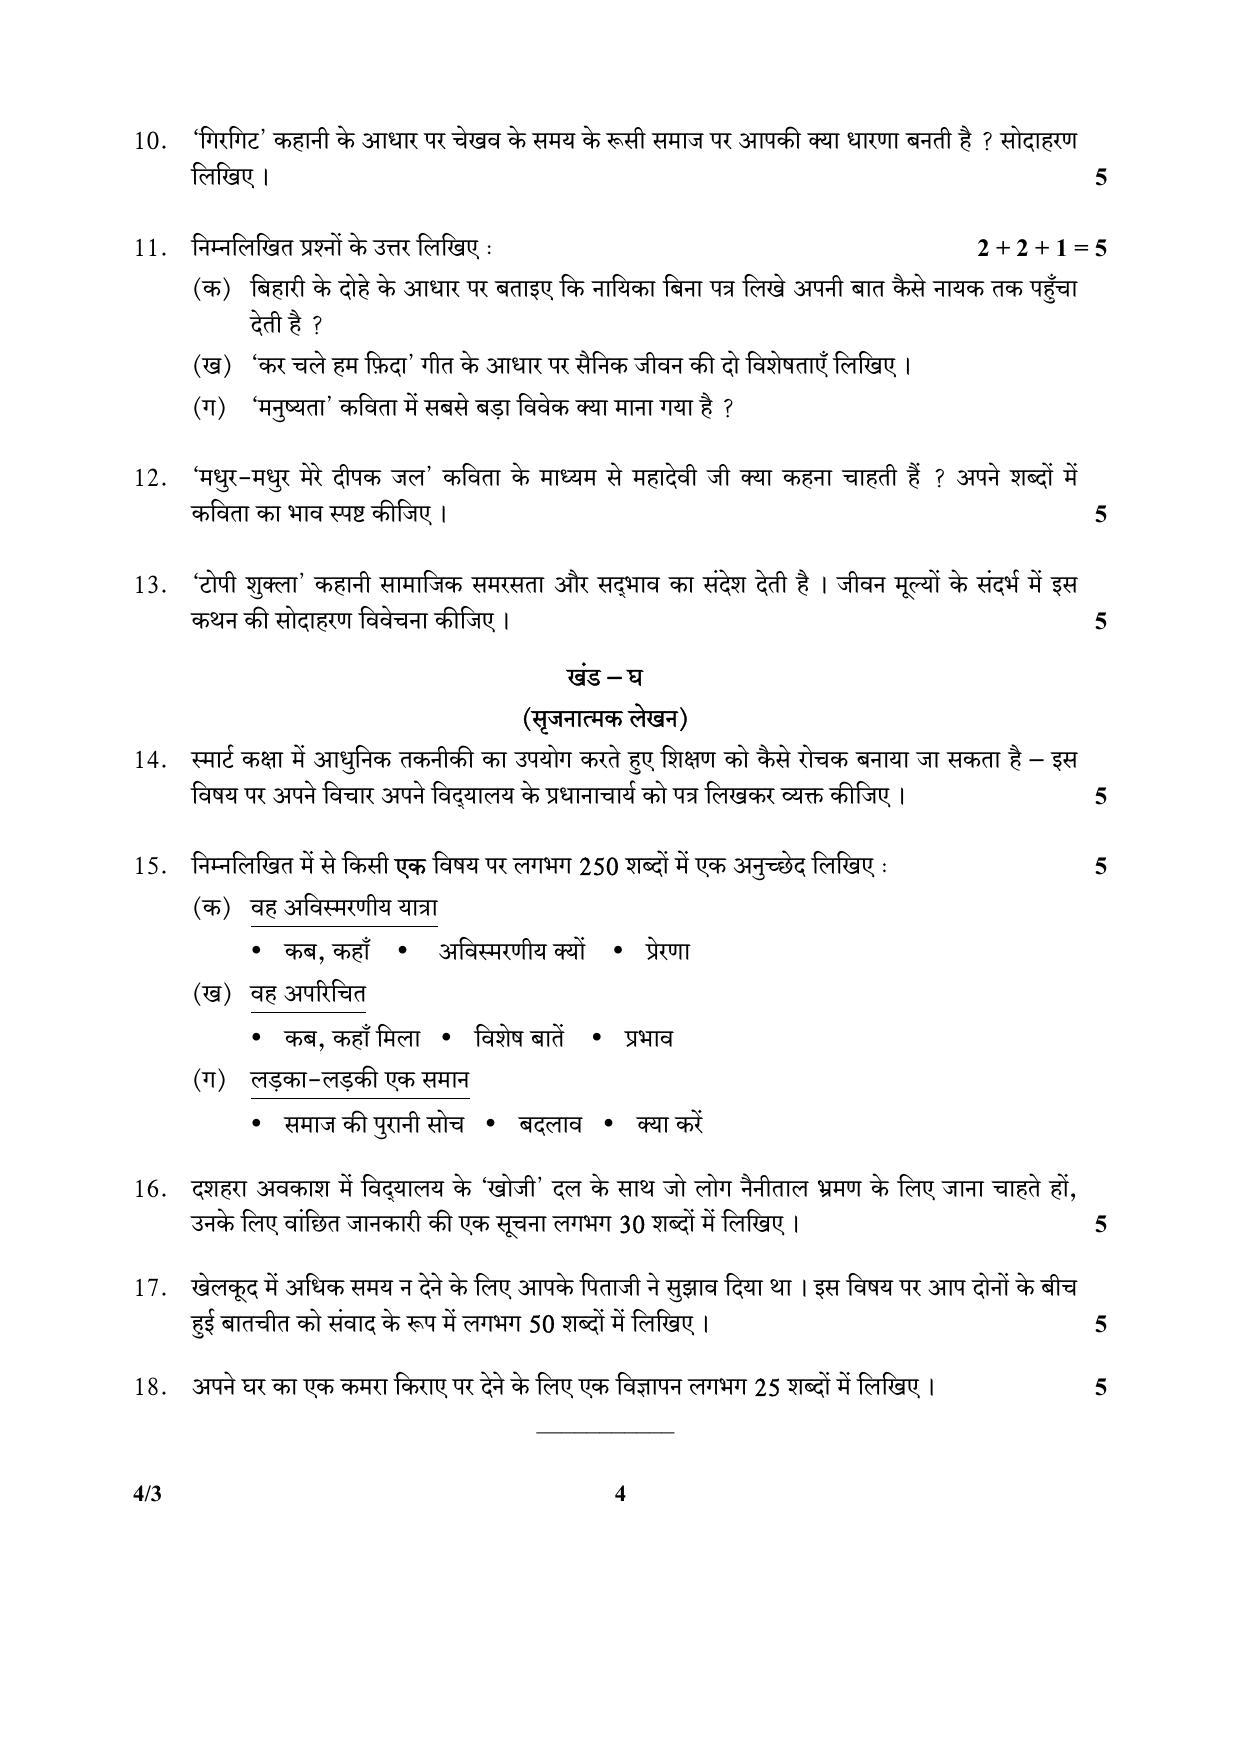 CBSE Class 10 4-3_Hindi 2017-comptt Question Paper - Page 4